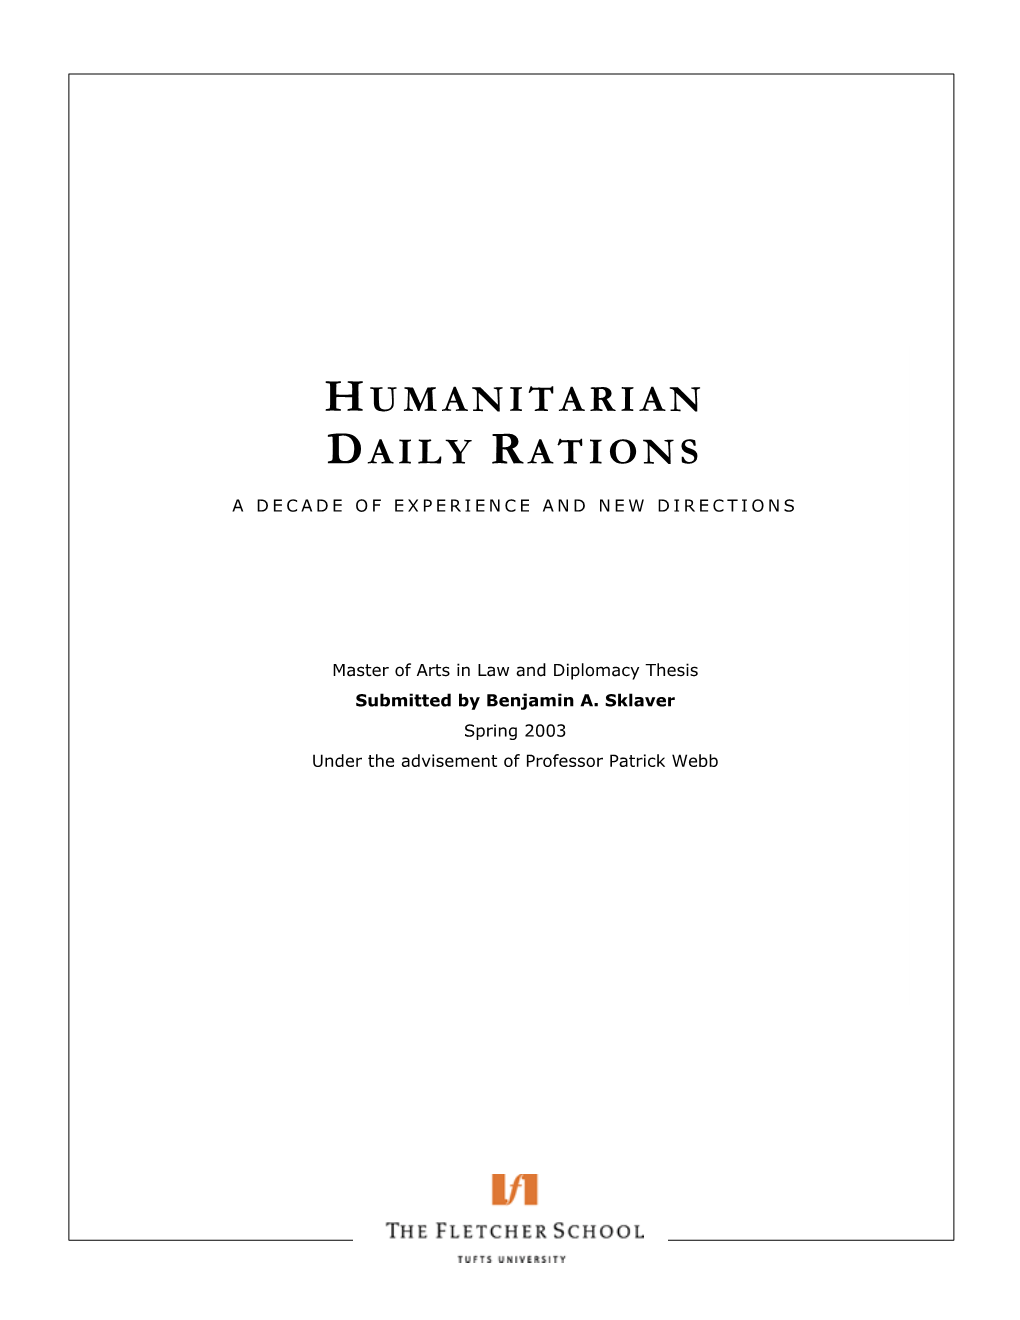 Humanitarian Daily Rations (Hdrs) in the Future